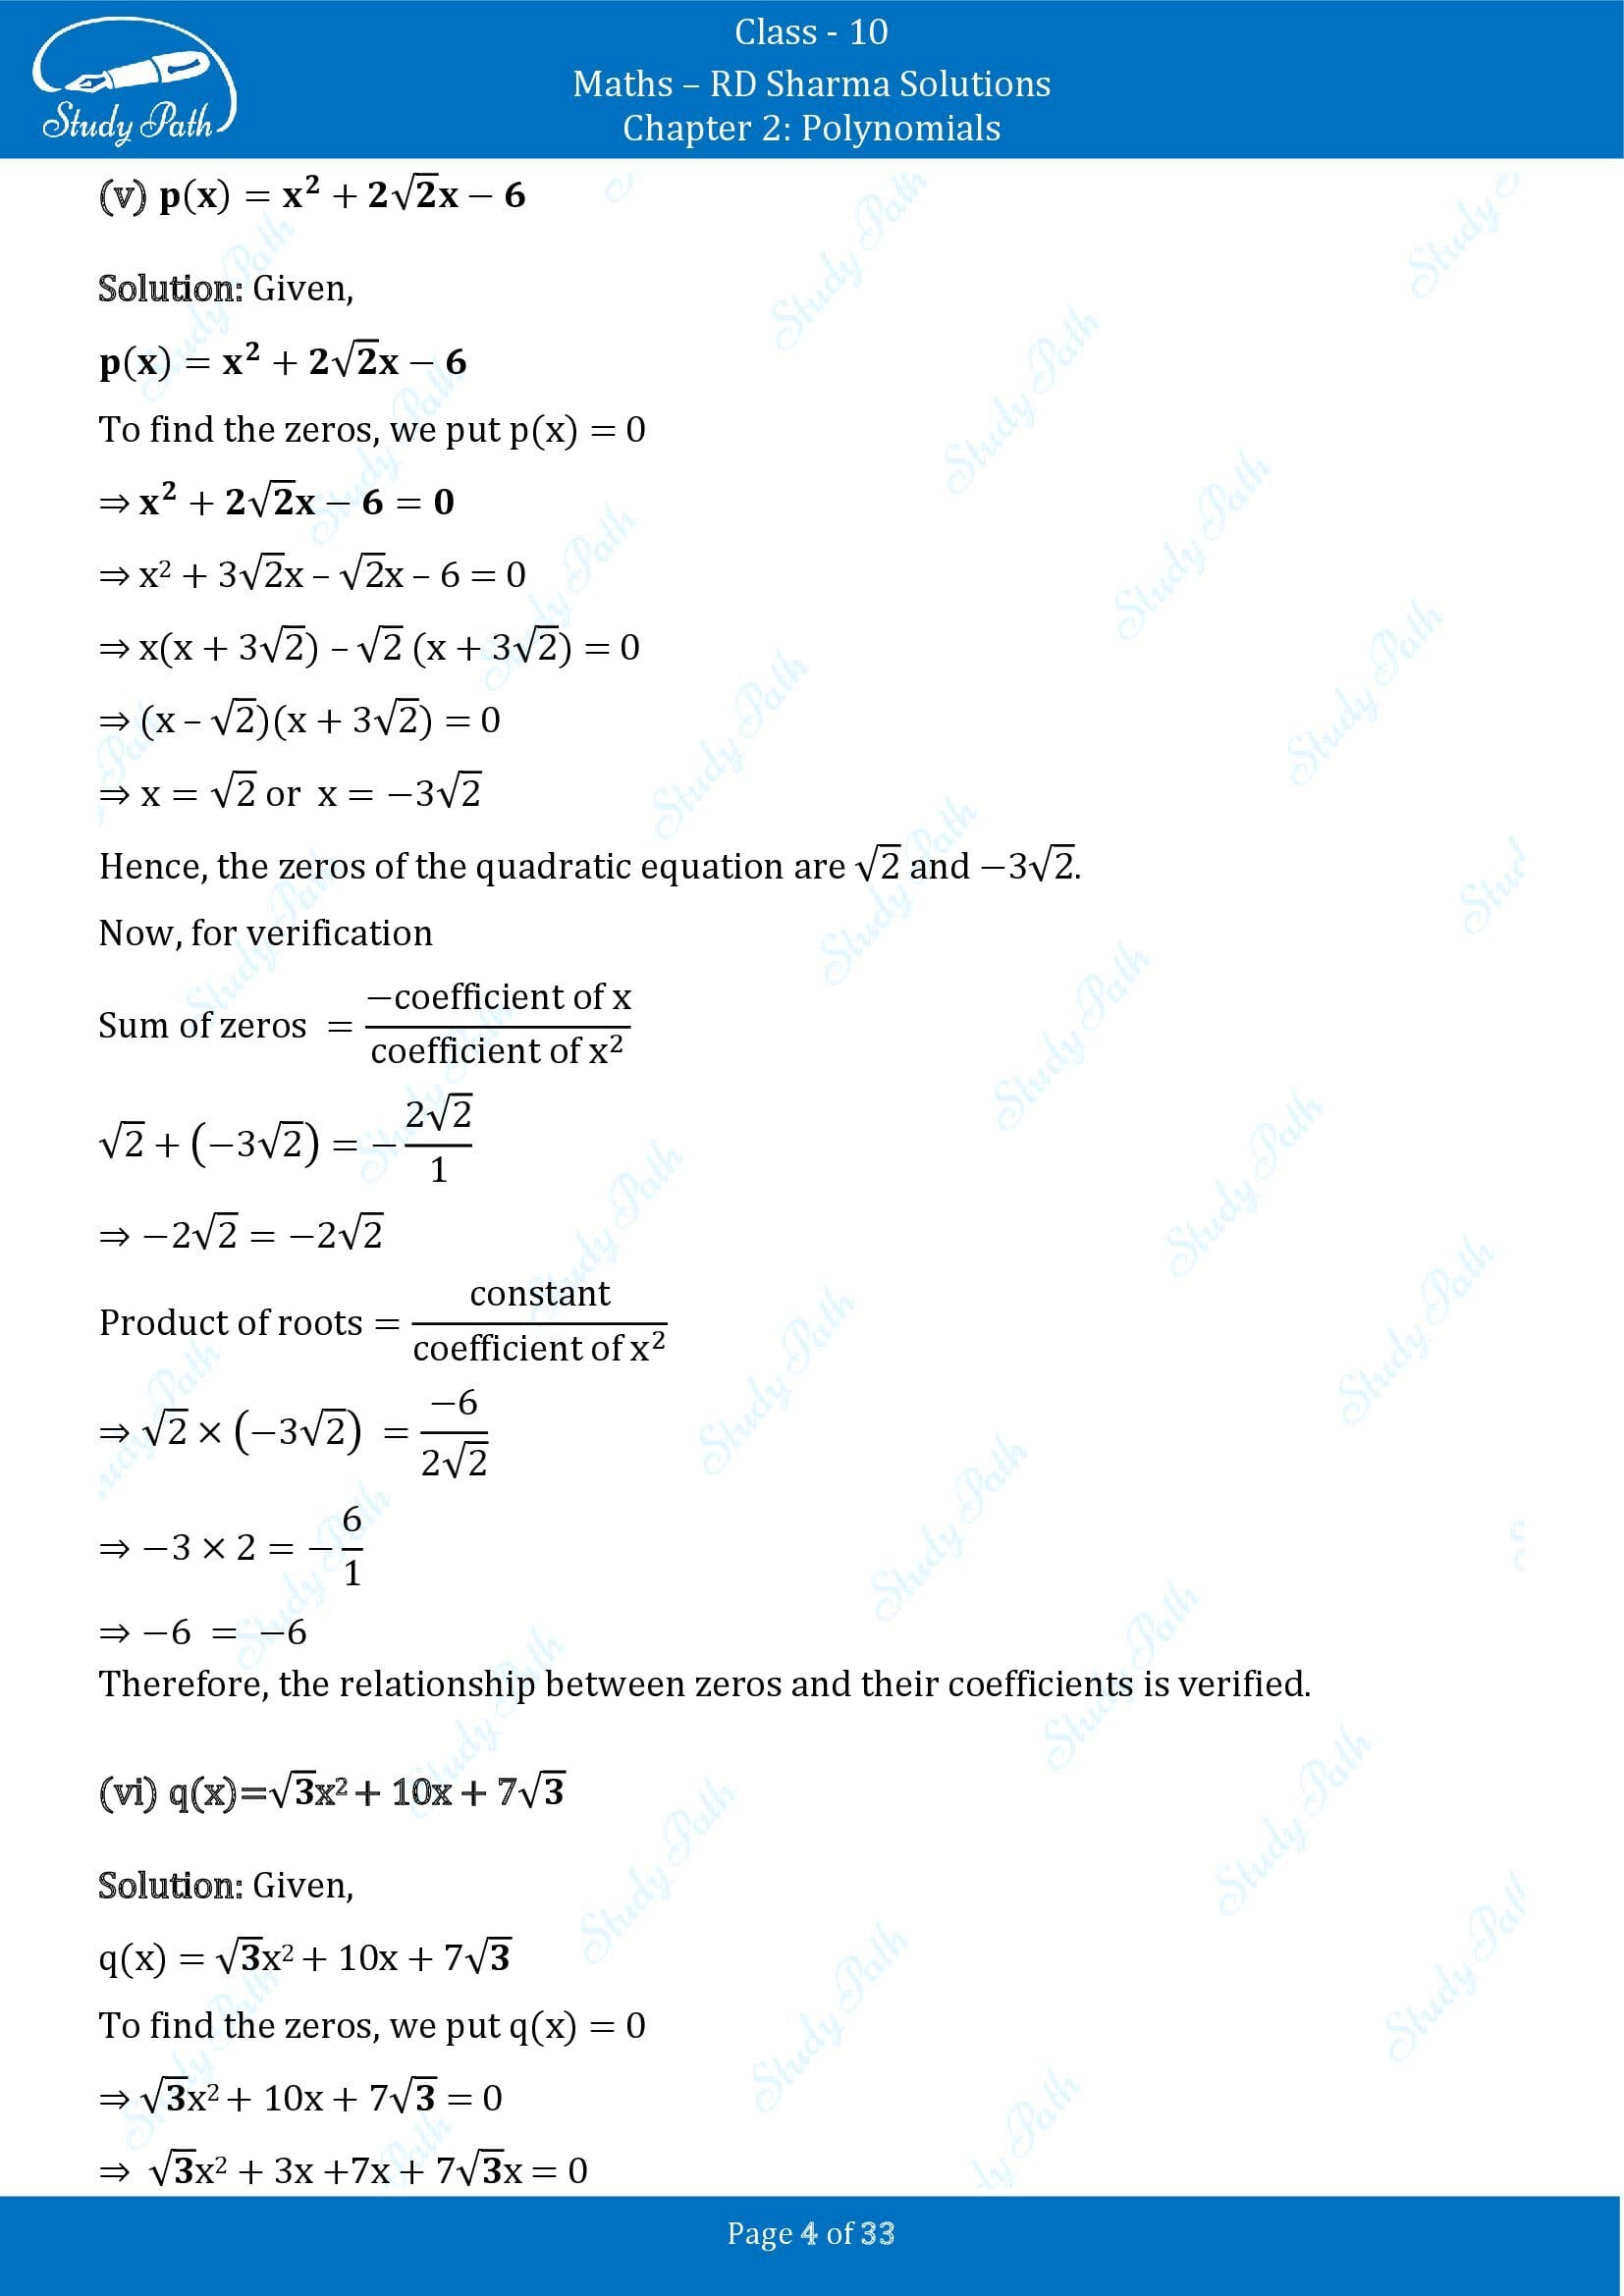 RD Sharma Solutions Class 10 Chapter 2 Polynomials Exercise 2.1 00004